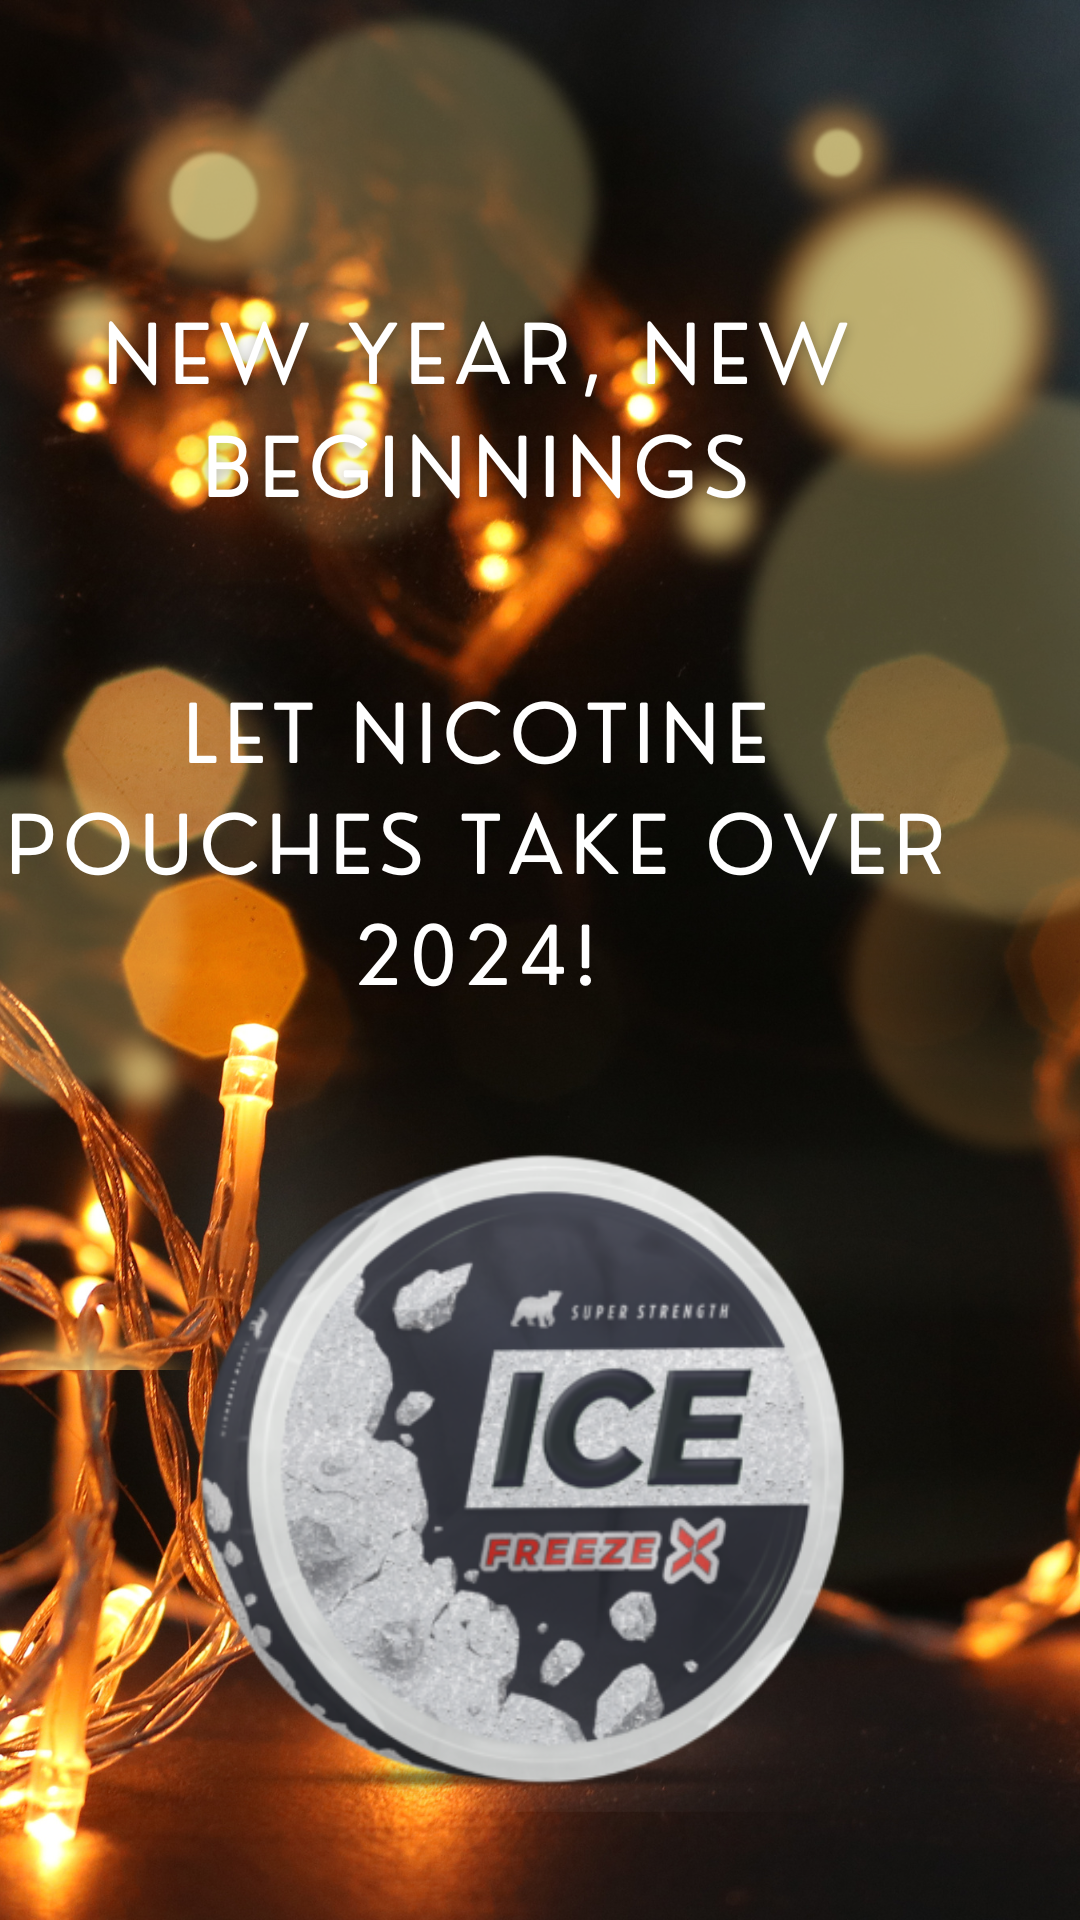 A template written " New year, New Beginnings with a can of nicotine pouches from ICE